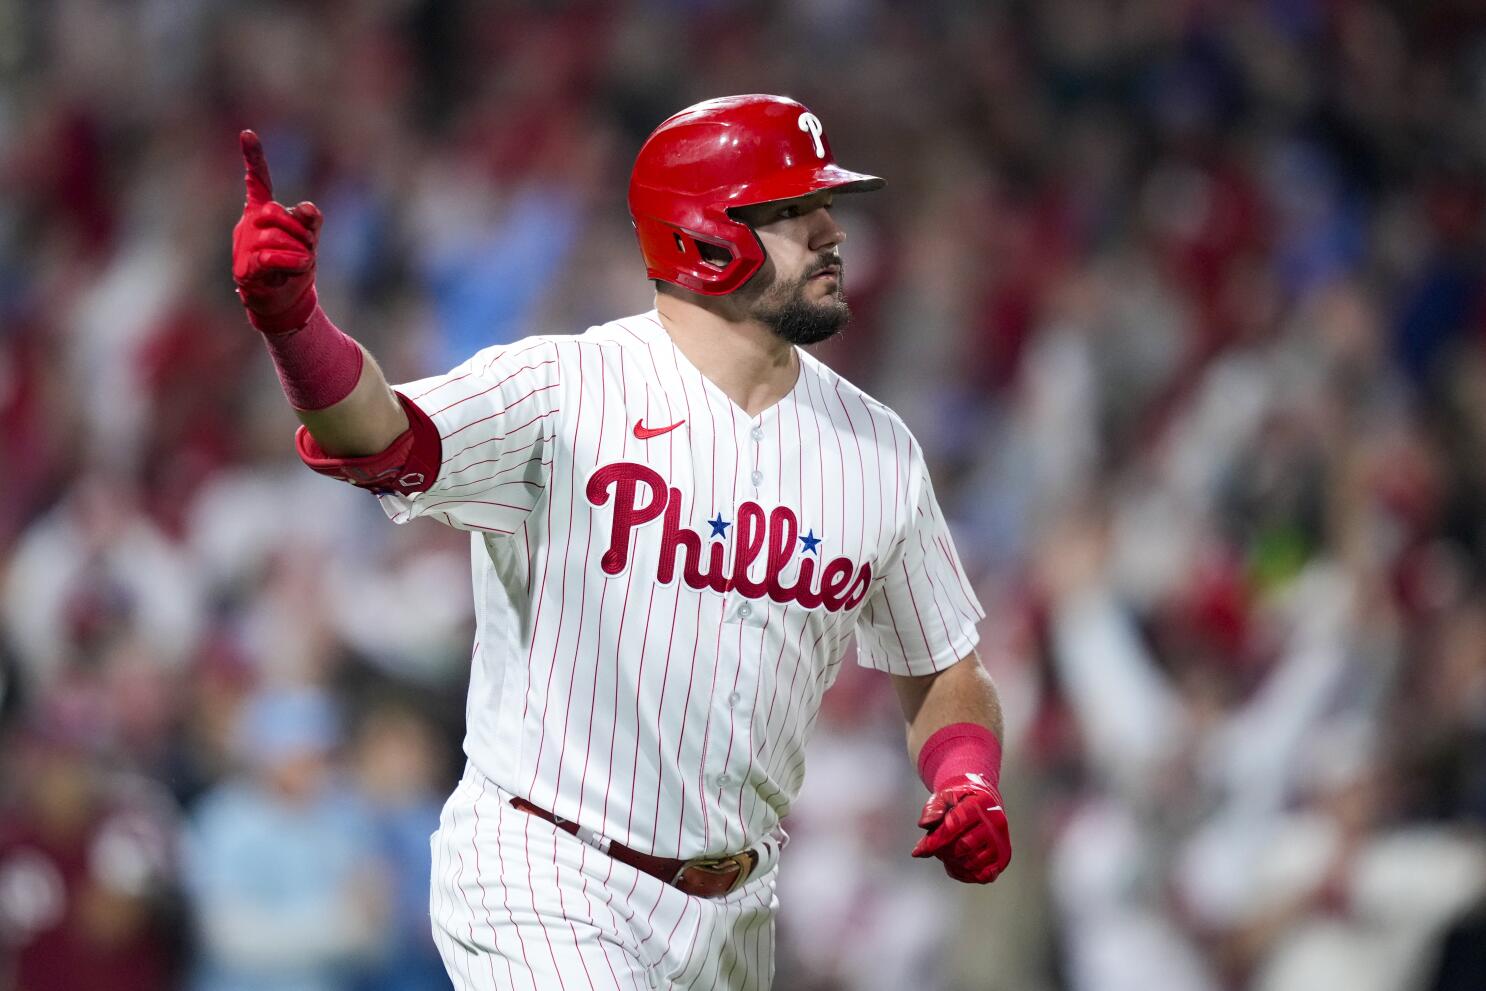 BRYSON STOTT BLOWS IT OPEN WITH A GRAND SLAM! 7-0 PHILLIES